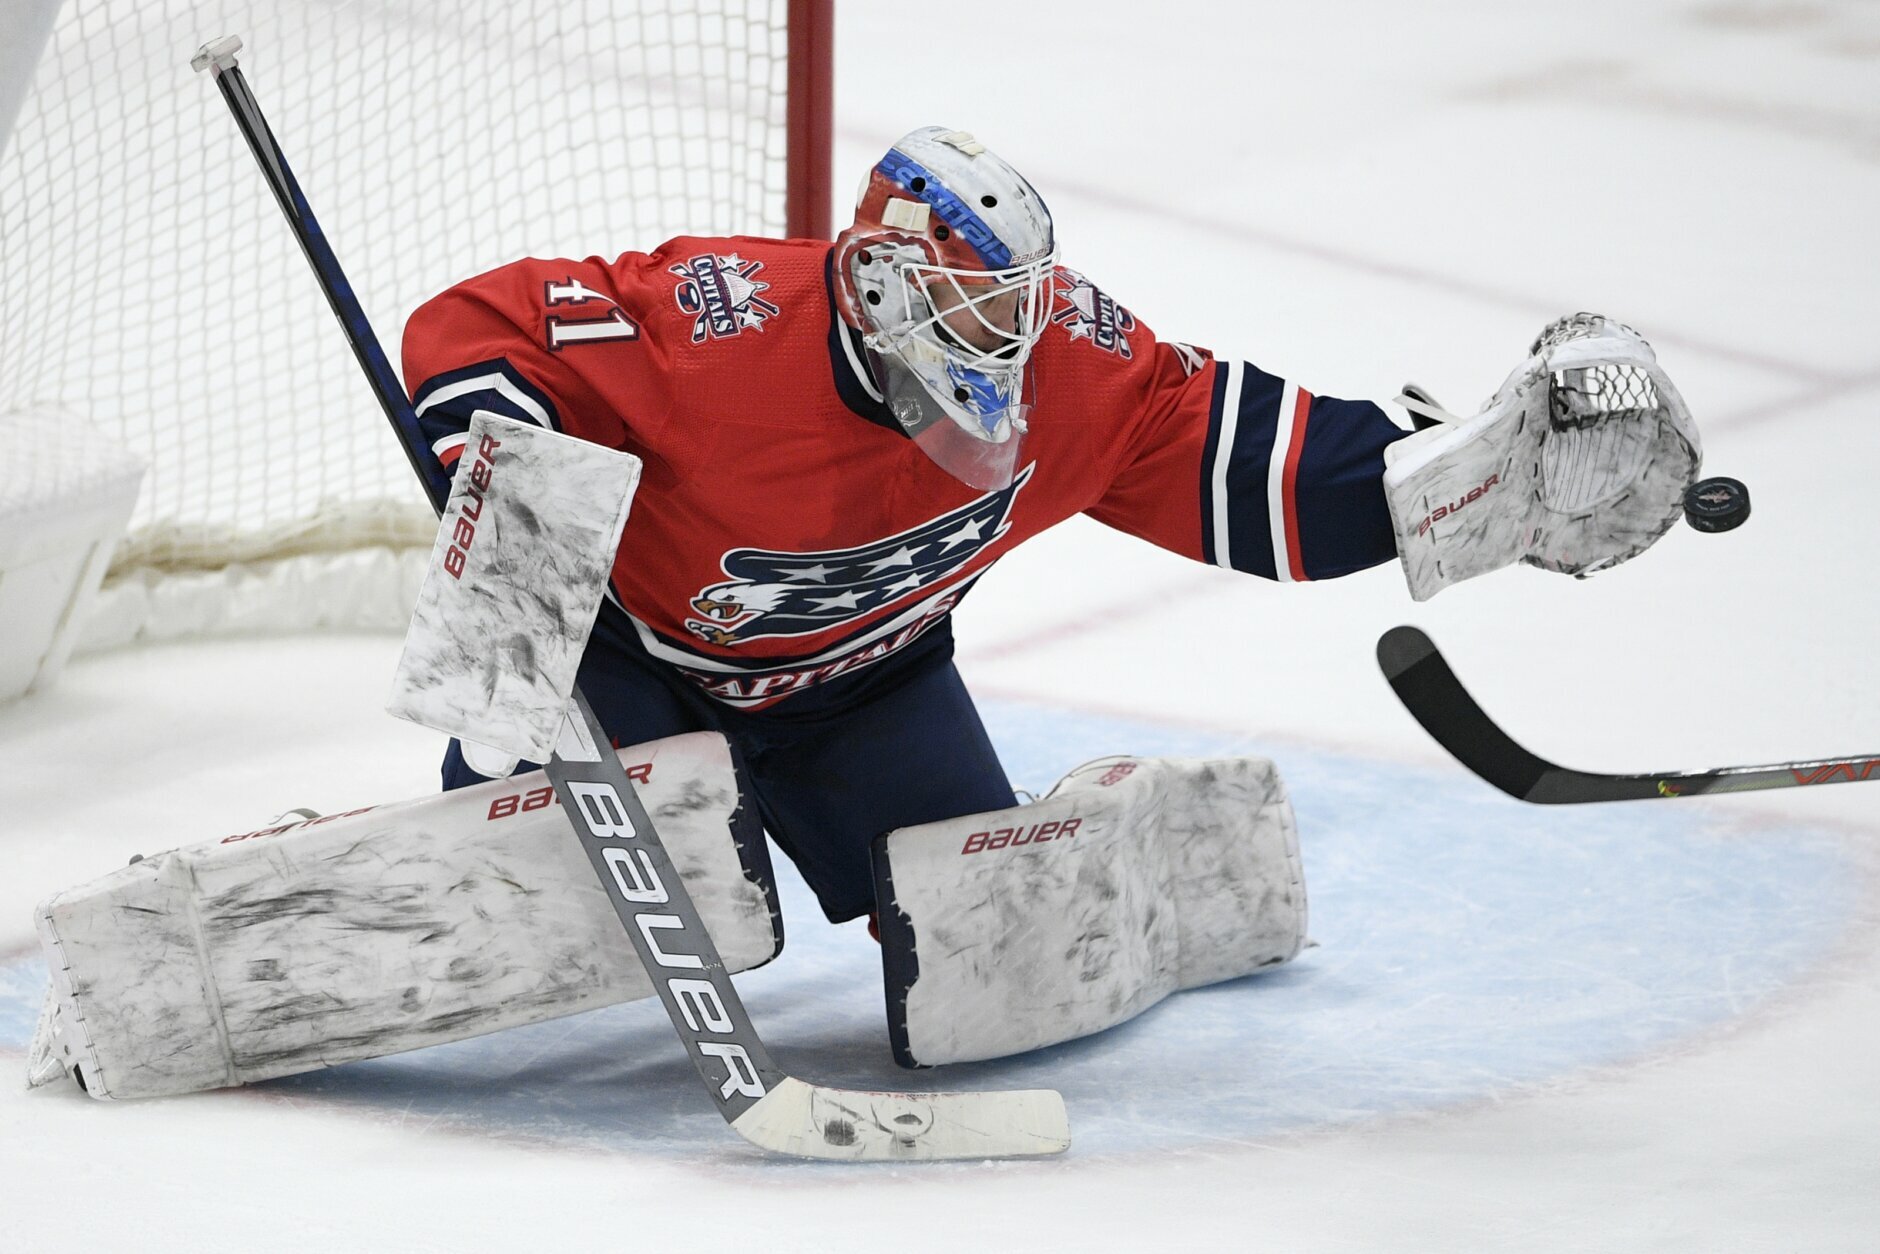 Washington Capitals goaltender Vitek Vanecek (41) reaches to catch the puck during the second period of an NHL hockey game against the Pittsburgh Penguins, Tuesday, Feb. 23, 2021, in Washington. (AP Photo/Nick Wass)